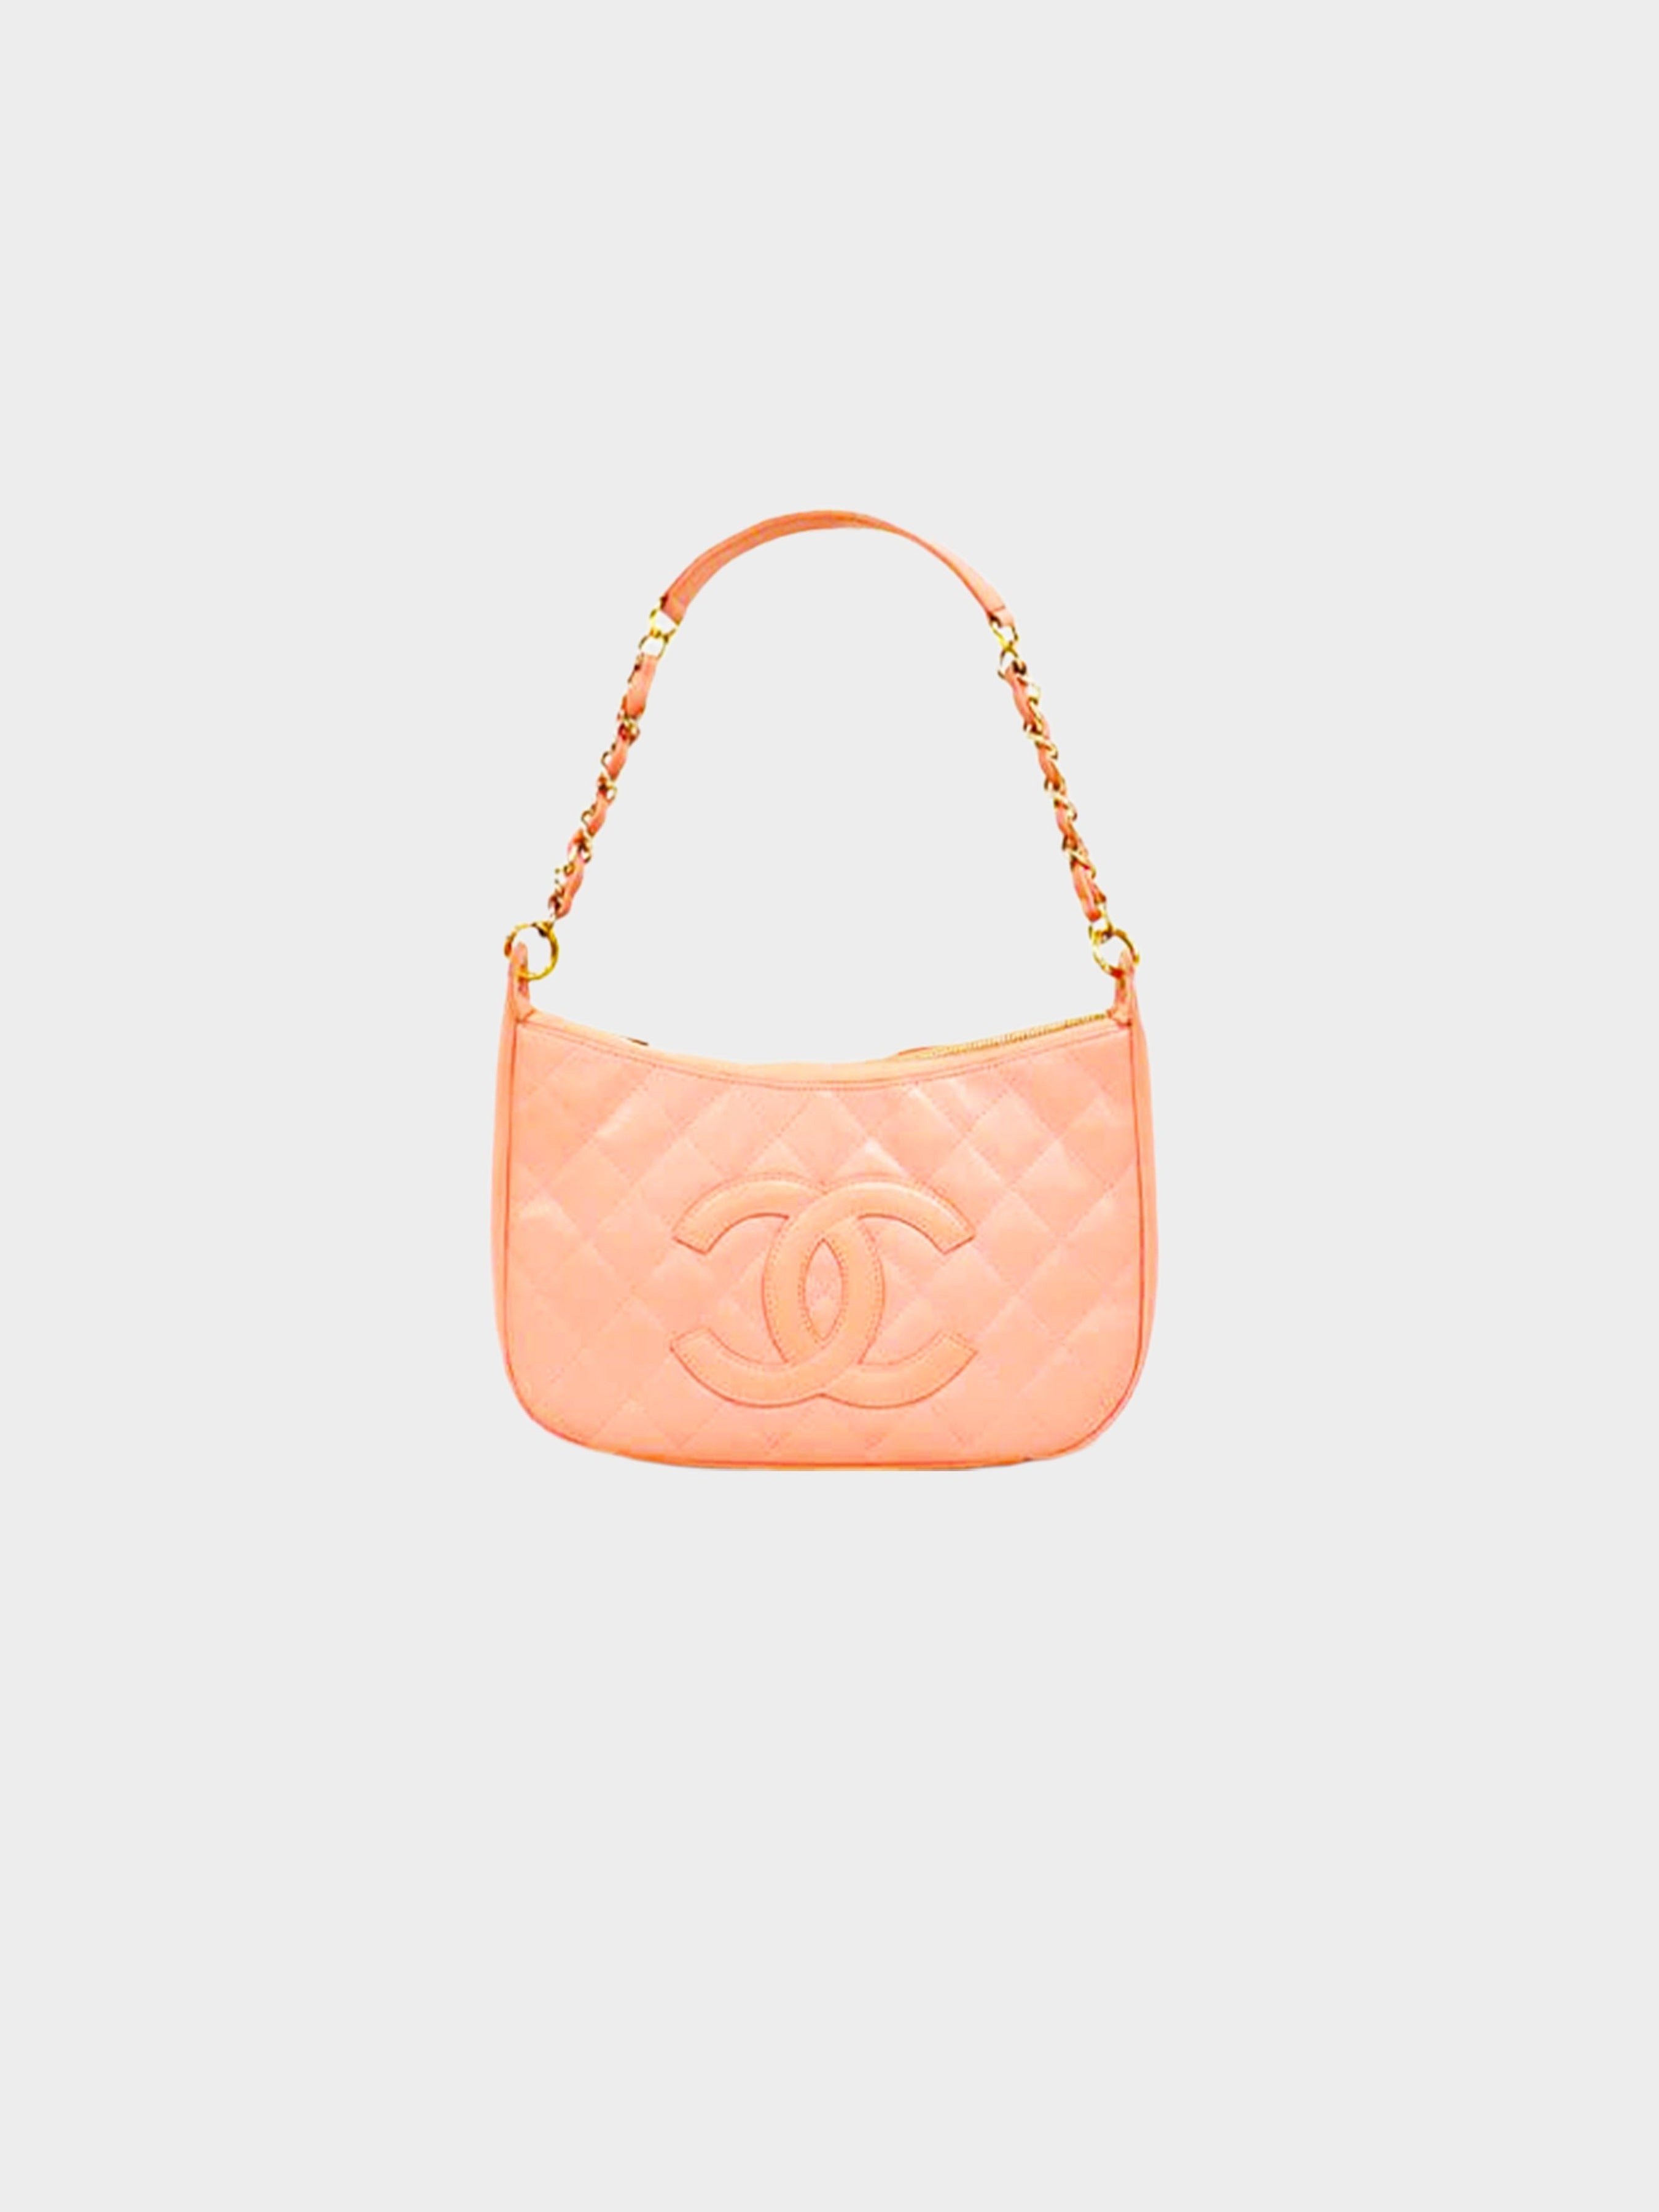 Chanel 2003 Pink Timeless CC Chain Shoulder Bag · INTO